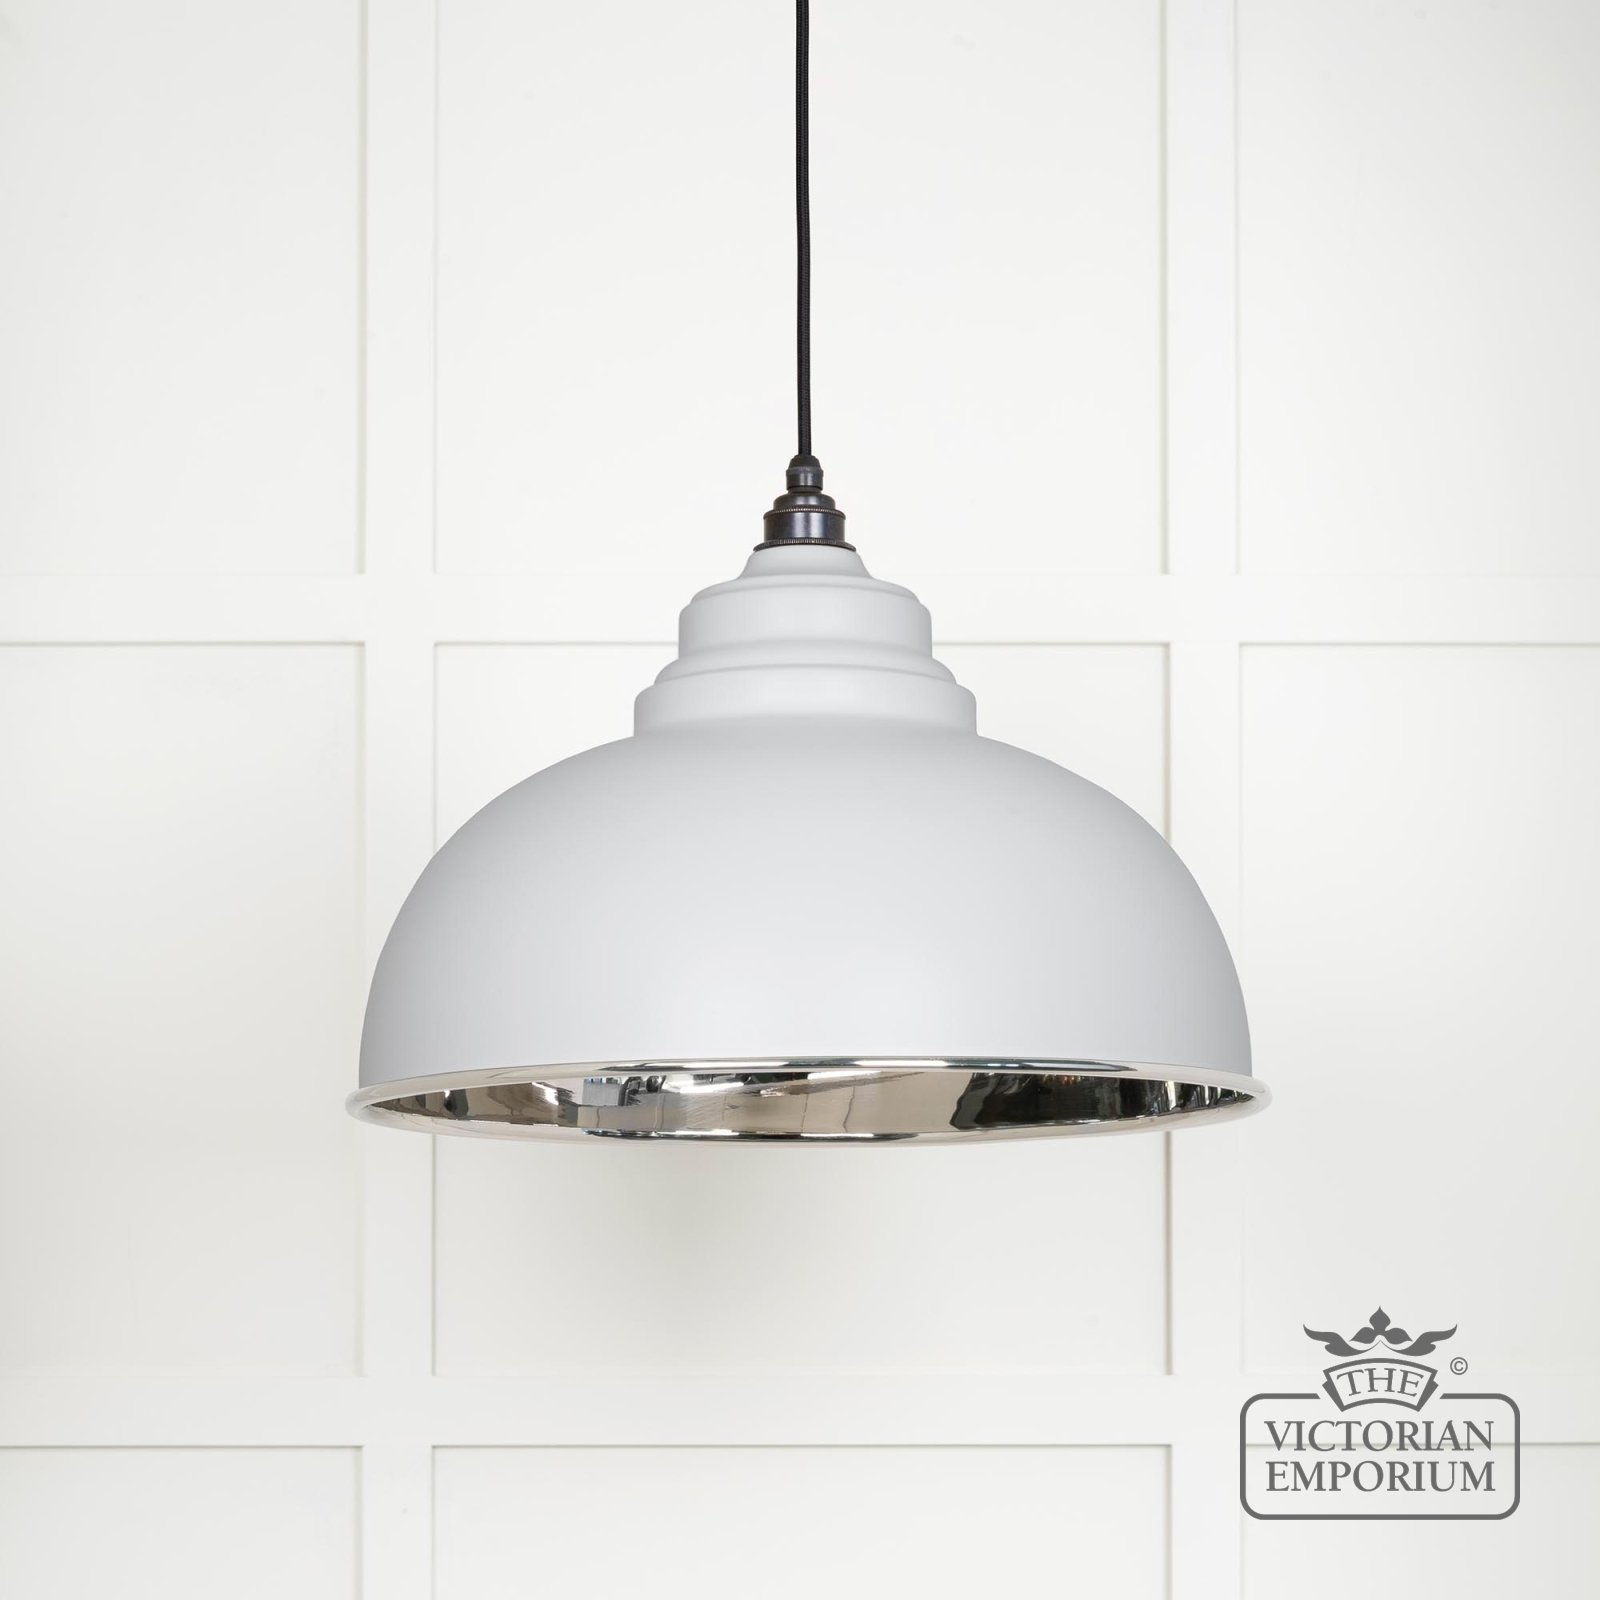 Harlow pendant light in smooth nickel with Flock exterior